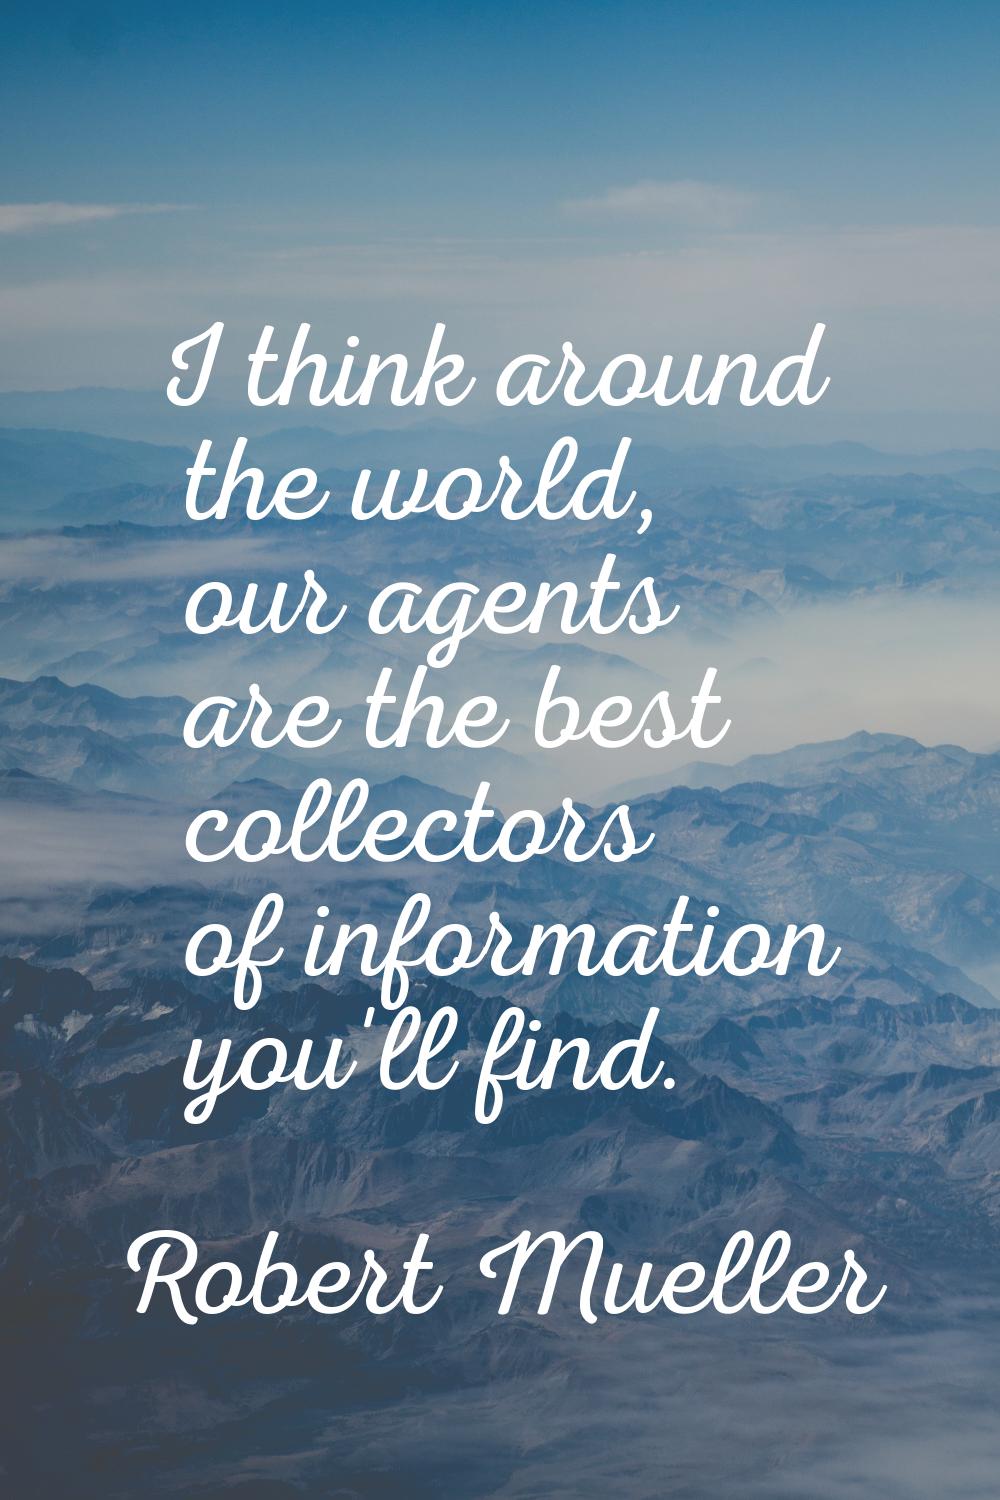 I think around the world, our agents are the best collectors of information you'll find.